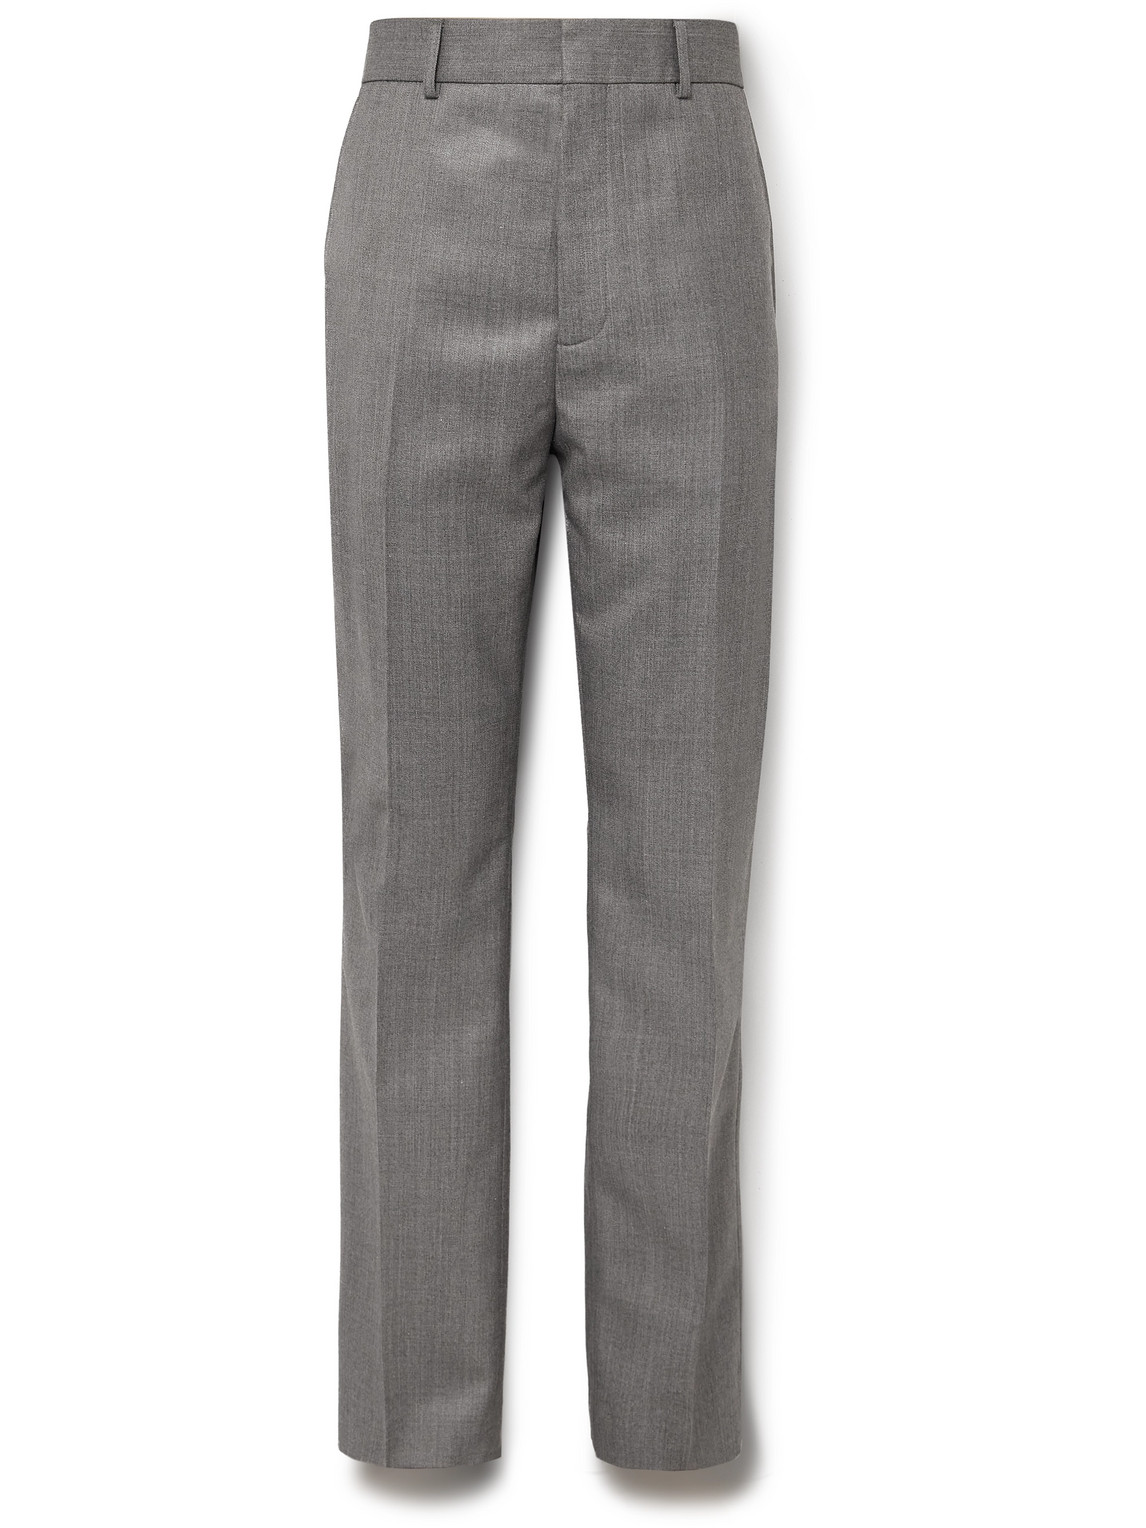 ACNE STUDIOS PHILLY SLIM-FIT STRAIGHT-LEG WOVEN TROUSERS